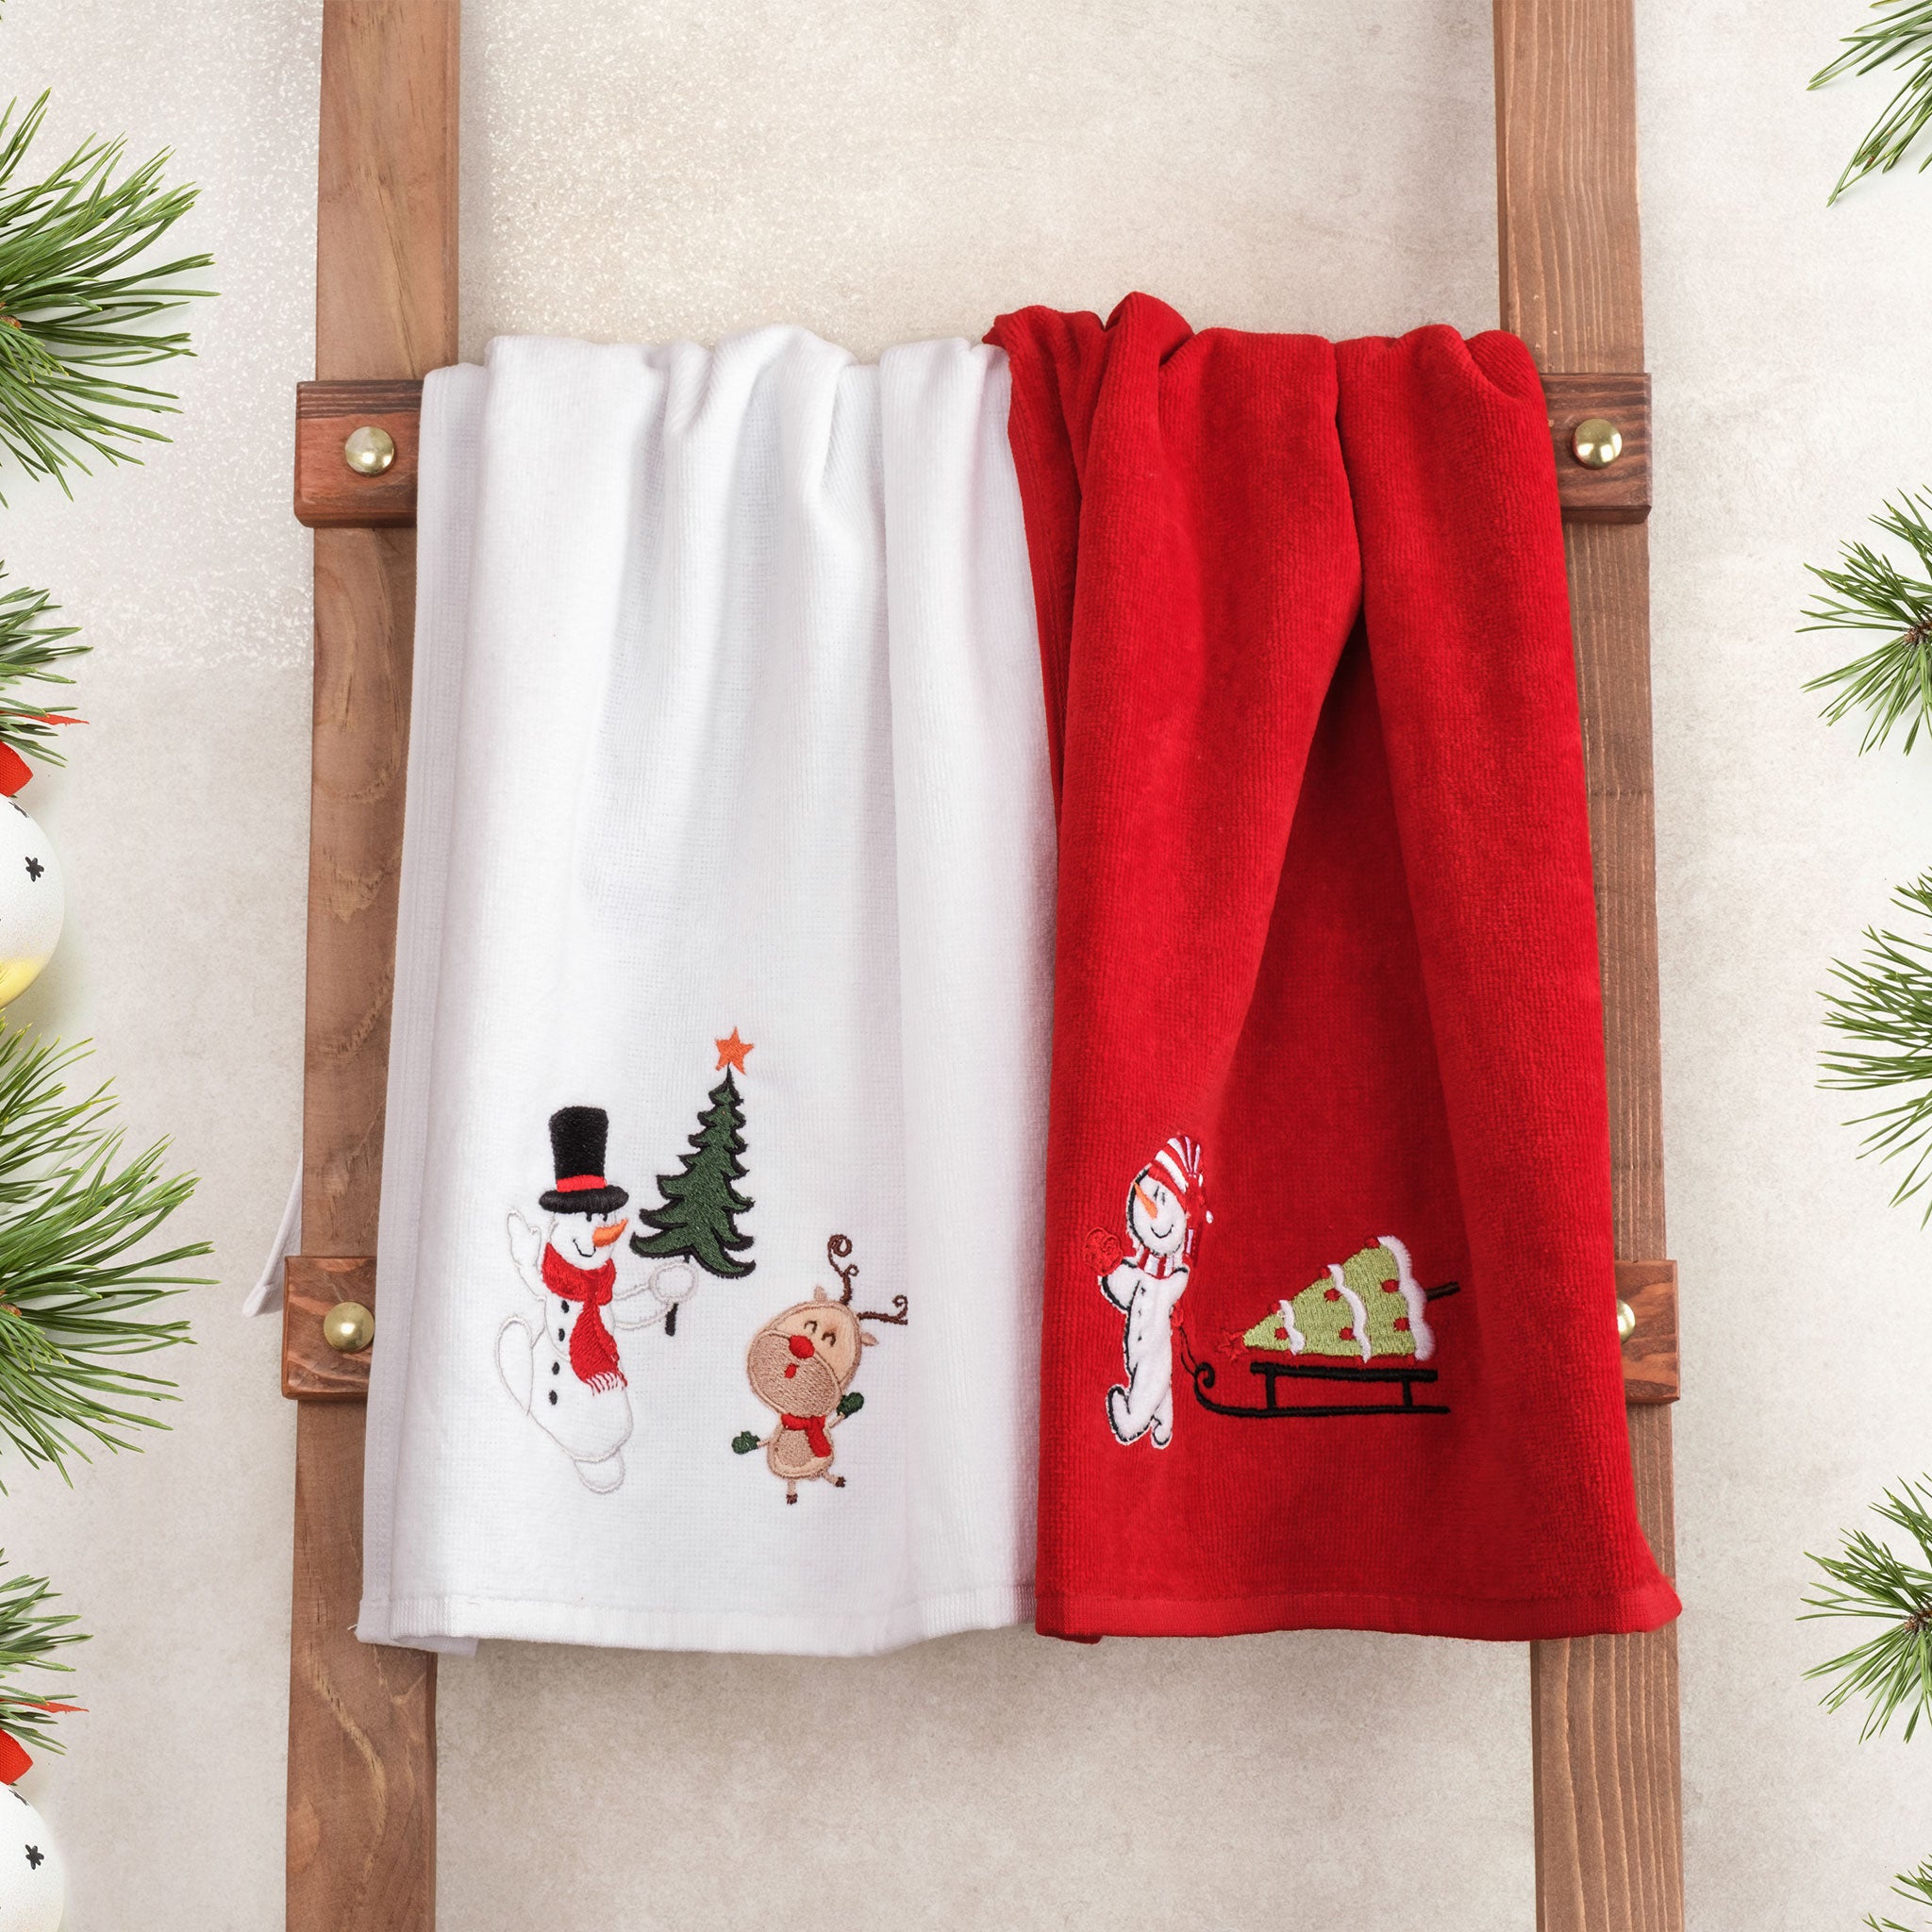 American Soft Linen - Christmas Towels 2  Packed Embroidered Towels for Decor Xmas - 60 Set Case Pack - Snowmen - 3